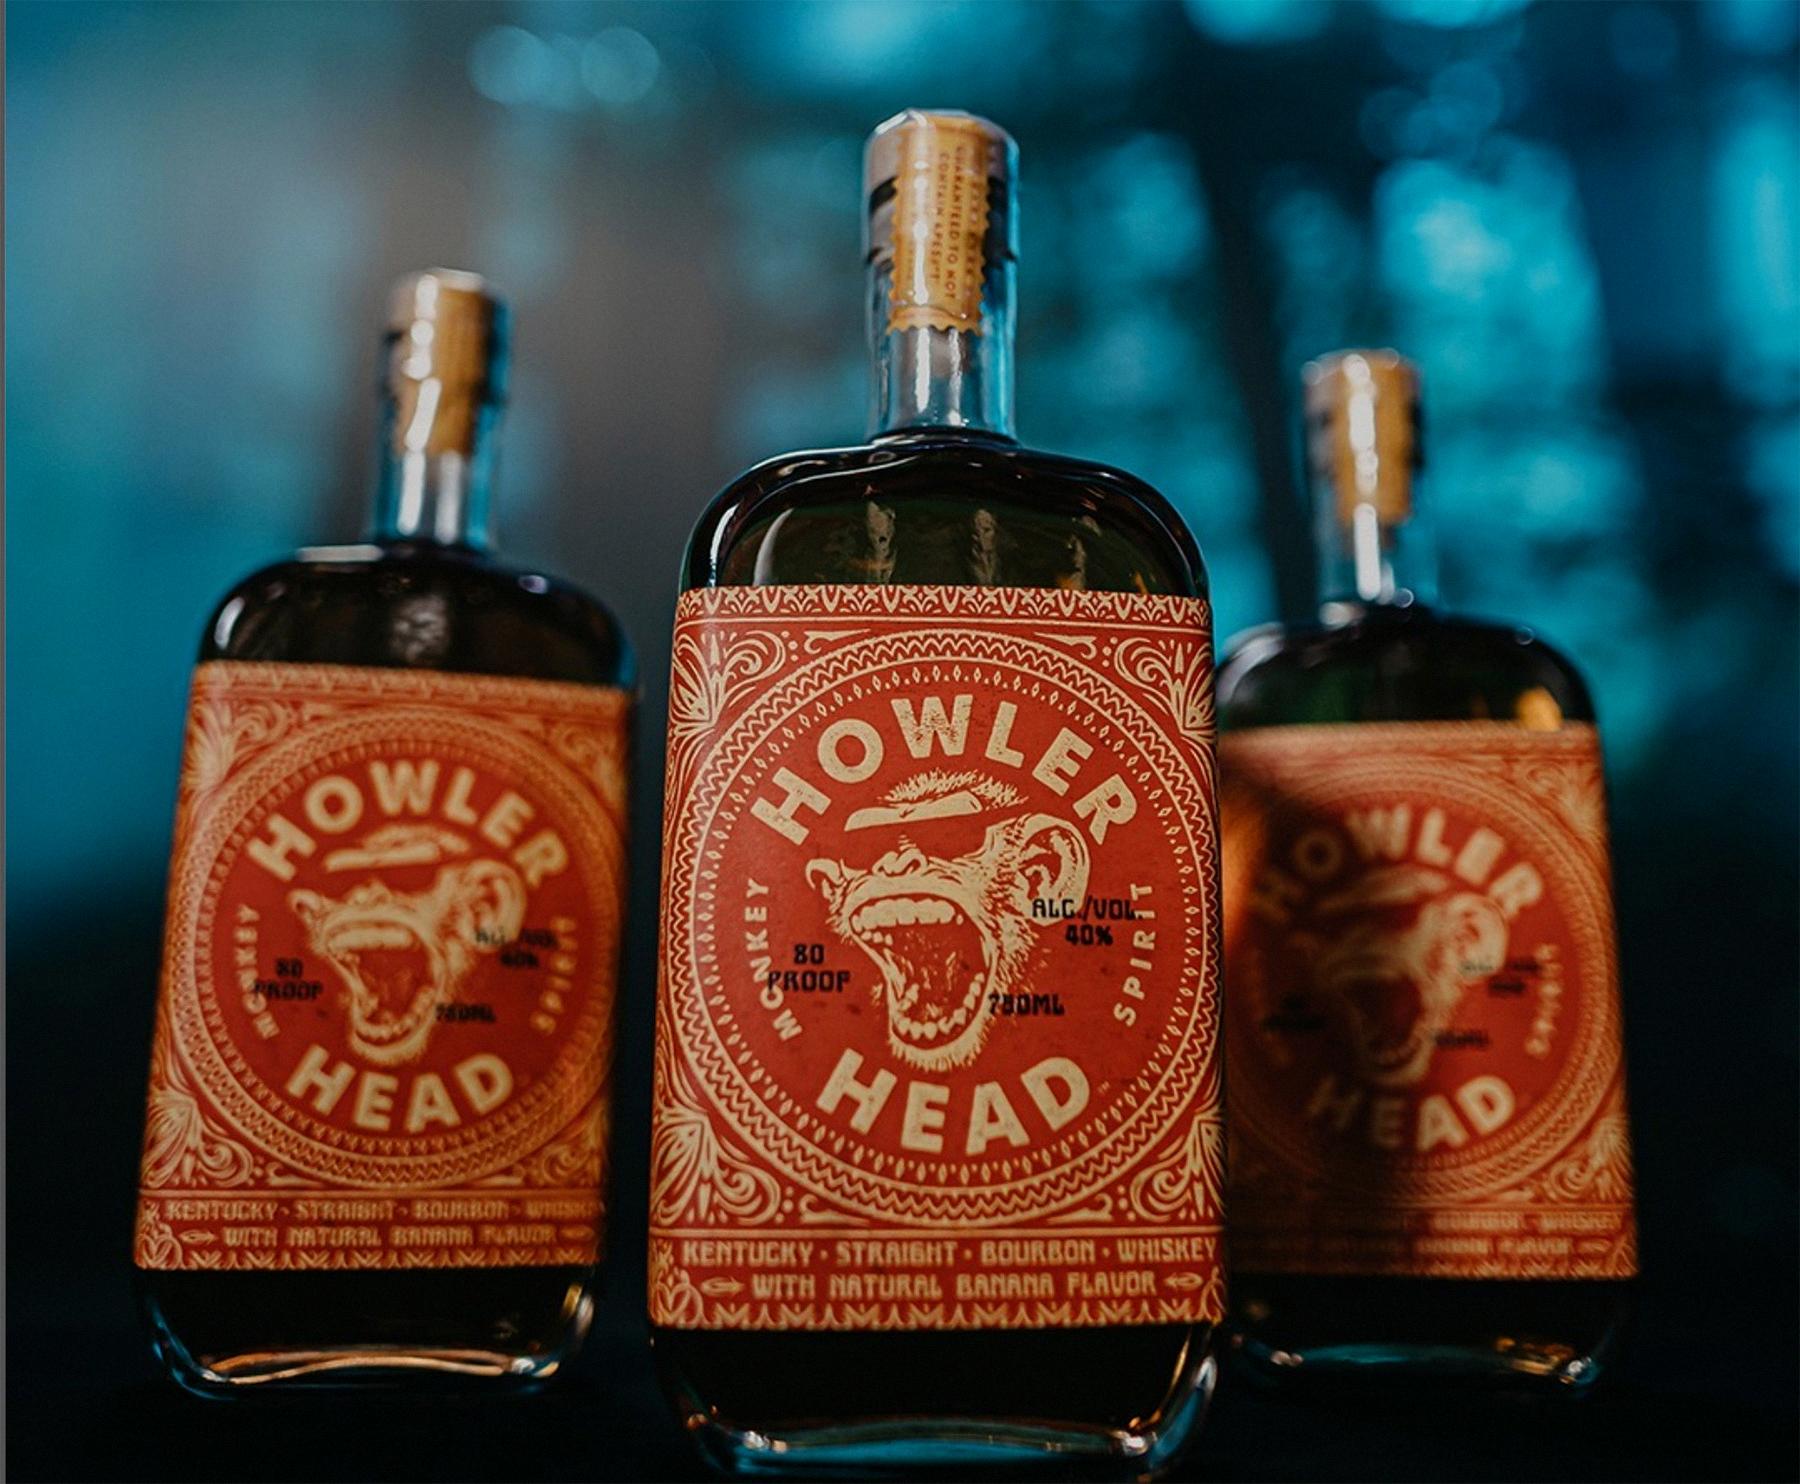 who owns howler head whiskey